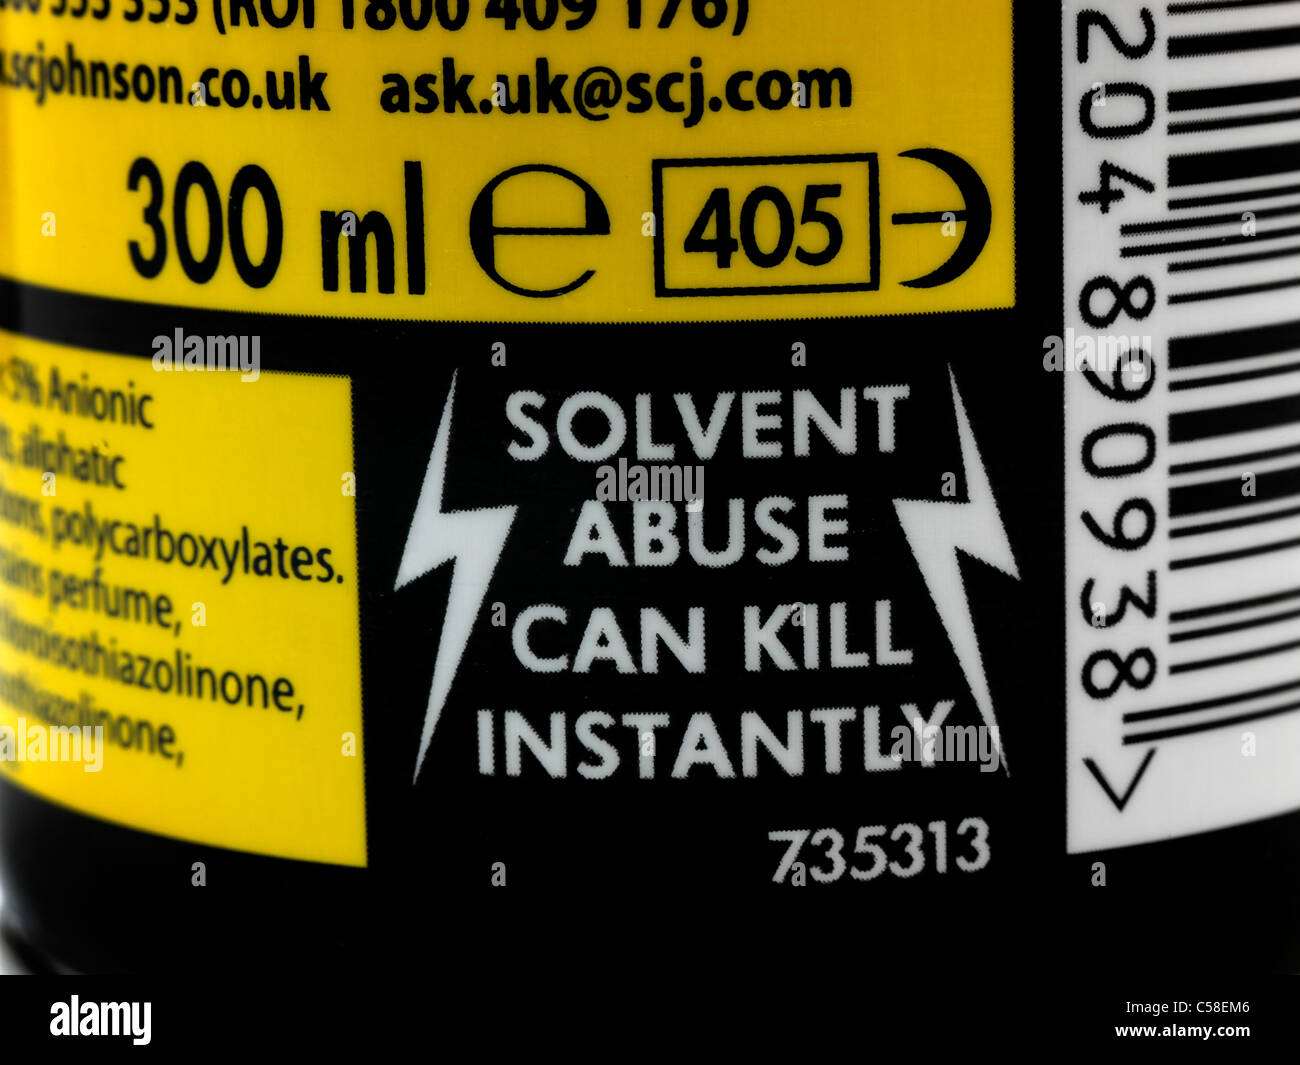 Solvent Abuse Can Kill Instantly Warning Label On Aerosol can Stock Photo